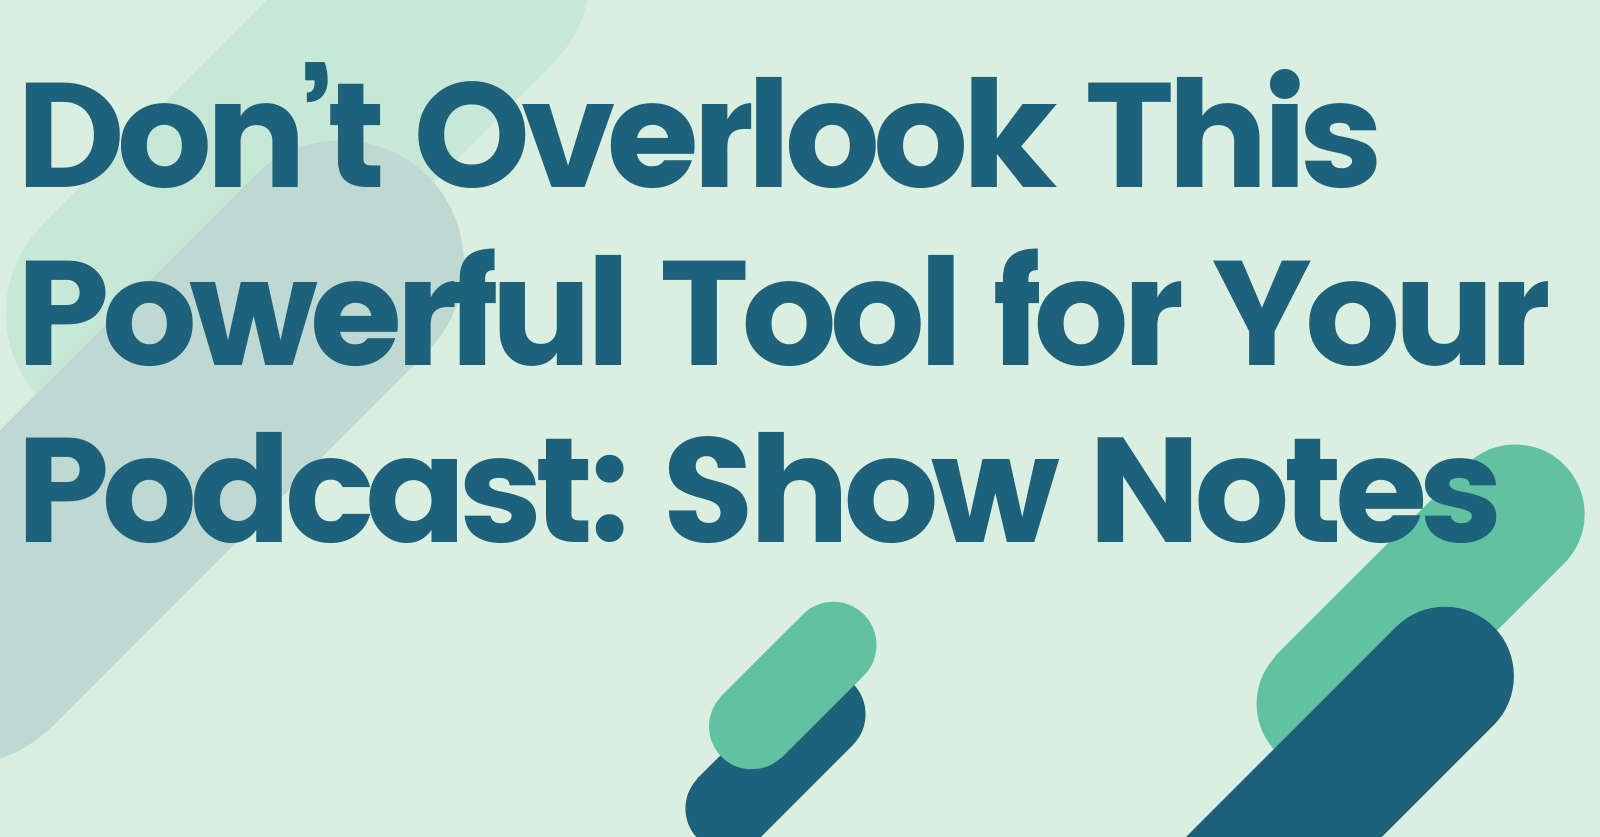 Don’t Overlook This Powerful Tool for Your Podcast: Show Notes